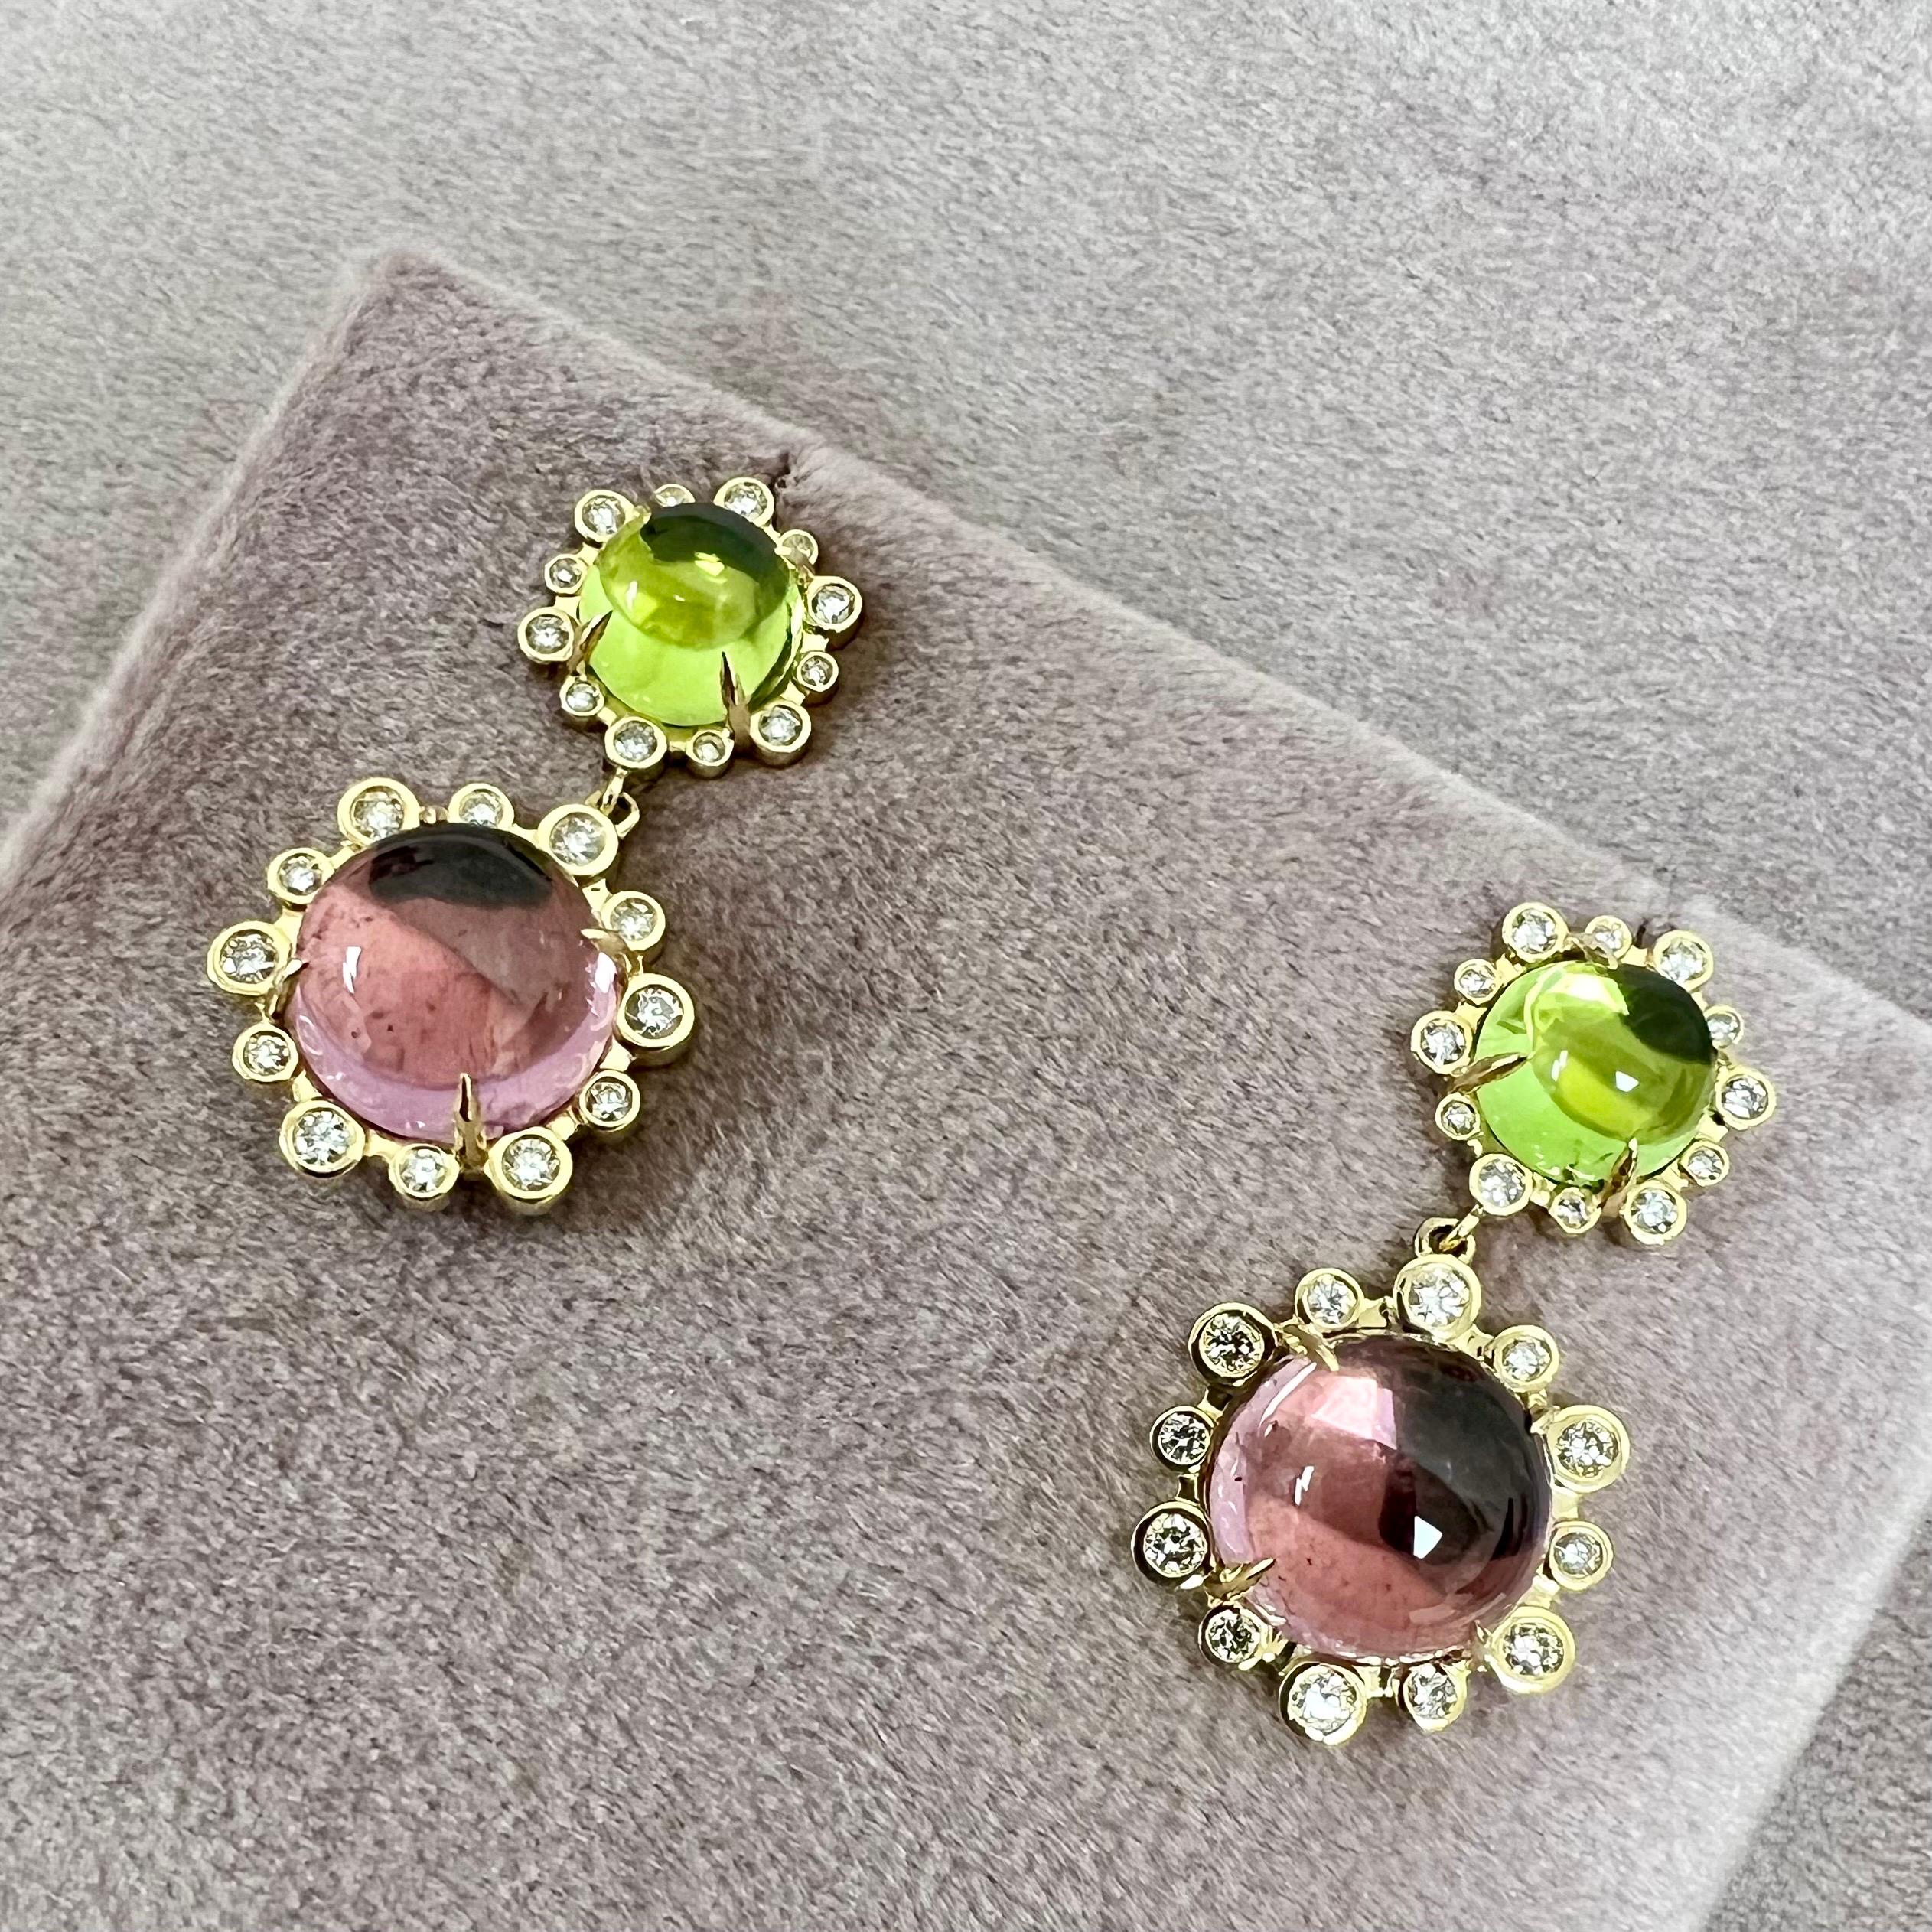 Cabochon Syna Earrings with Peridot, Rubellite and Diamonds